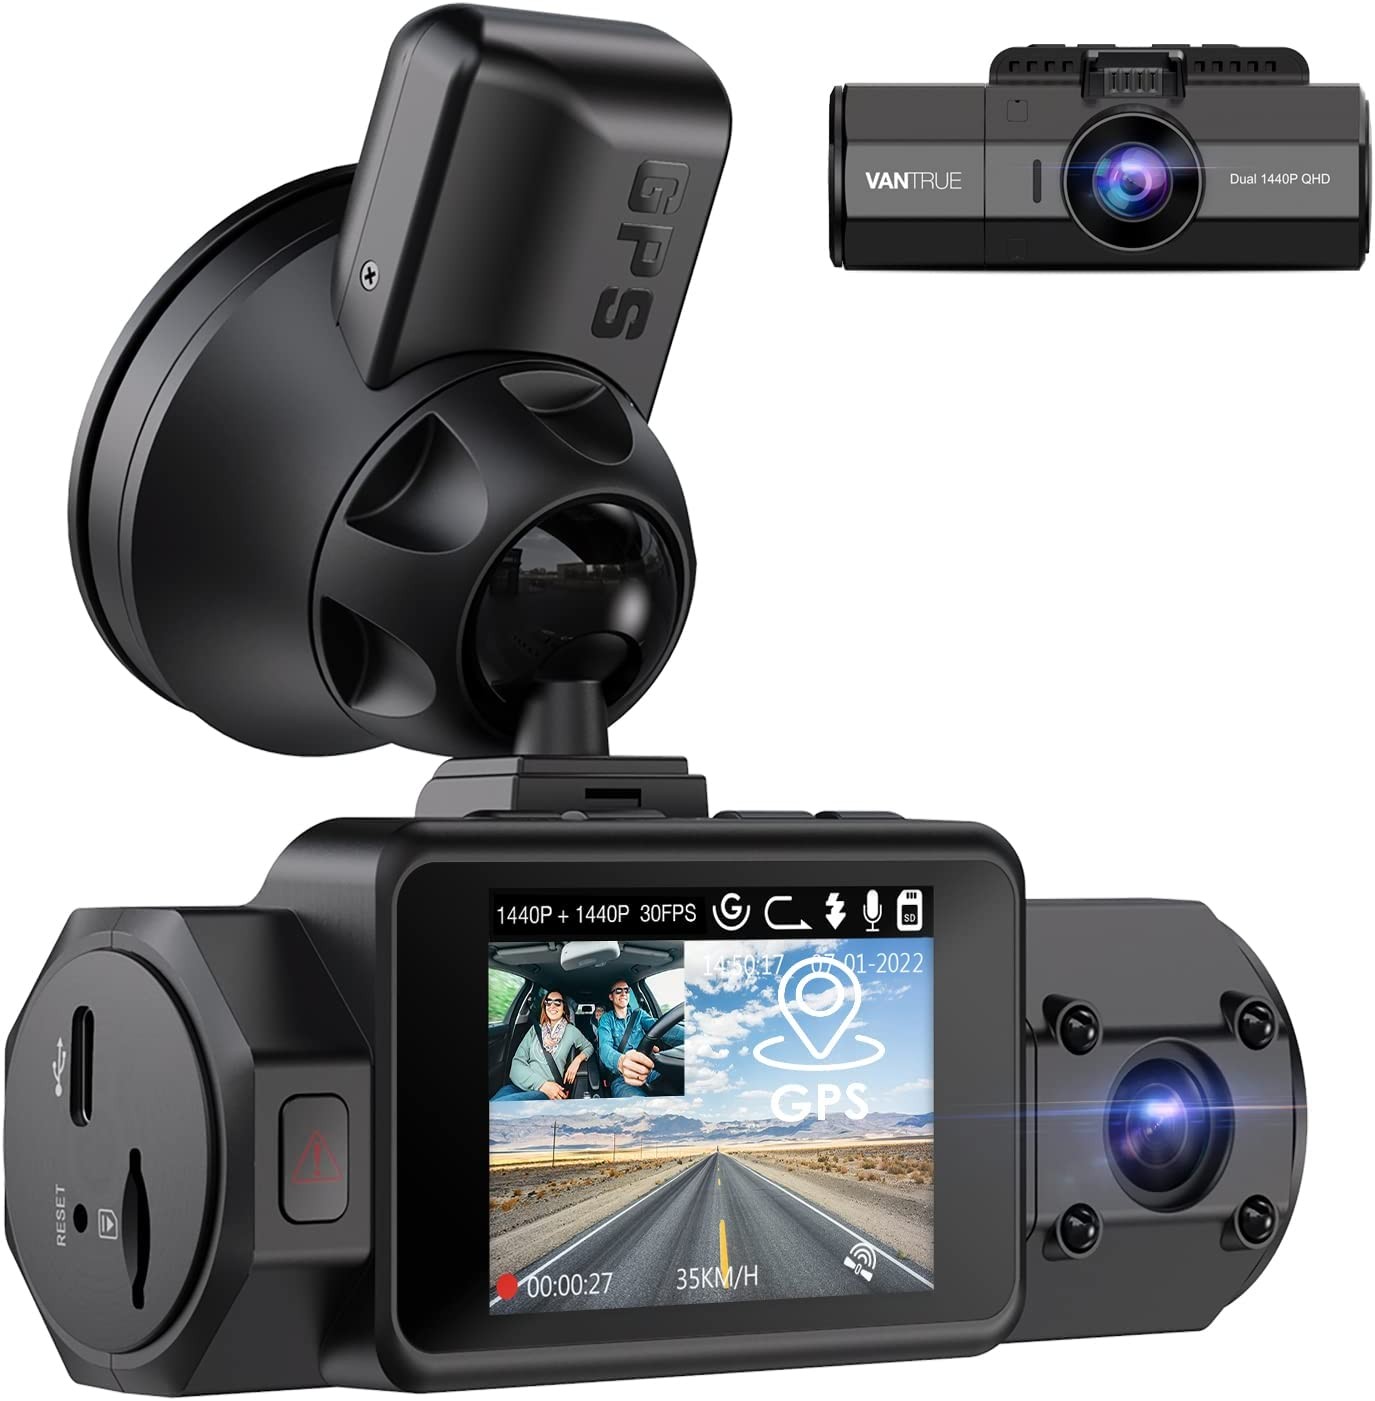 TYPE S S1 HD 720P Compact Dashcam